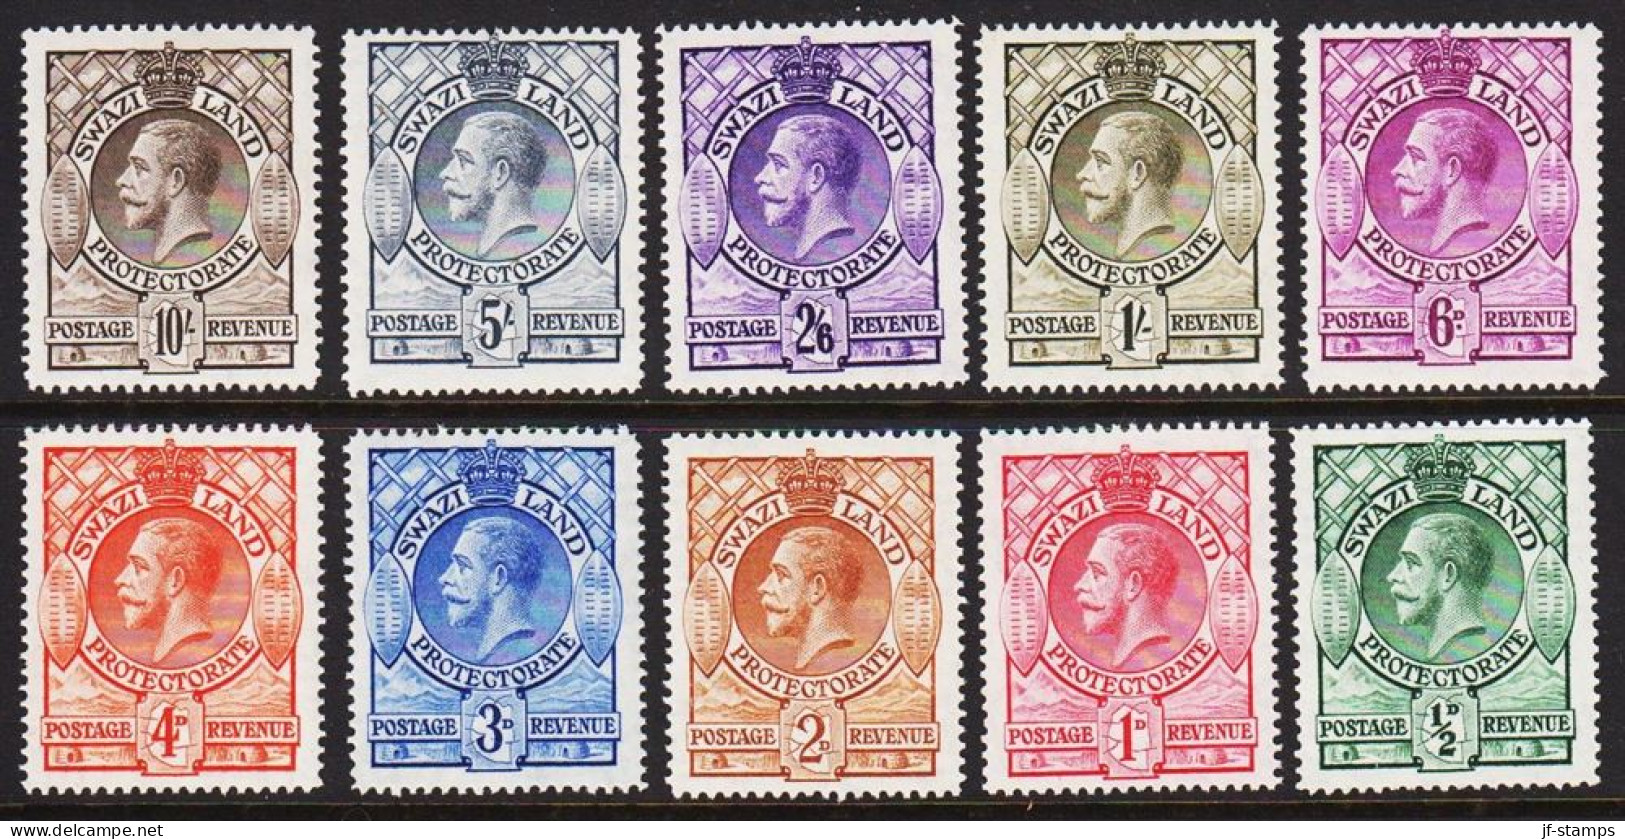 1933. SWAZILAND. Georg V Complete Set With 10 Beautiful Very Light Hinged Stamps. Excellent... (MICHEL 10-19) - JF540764 - Swasiland (...-1967)